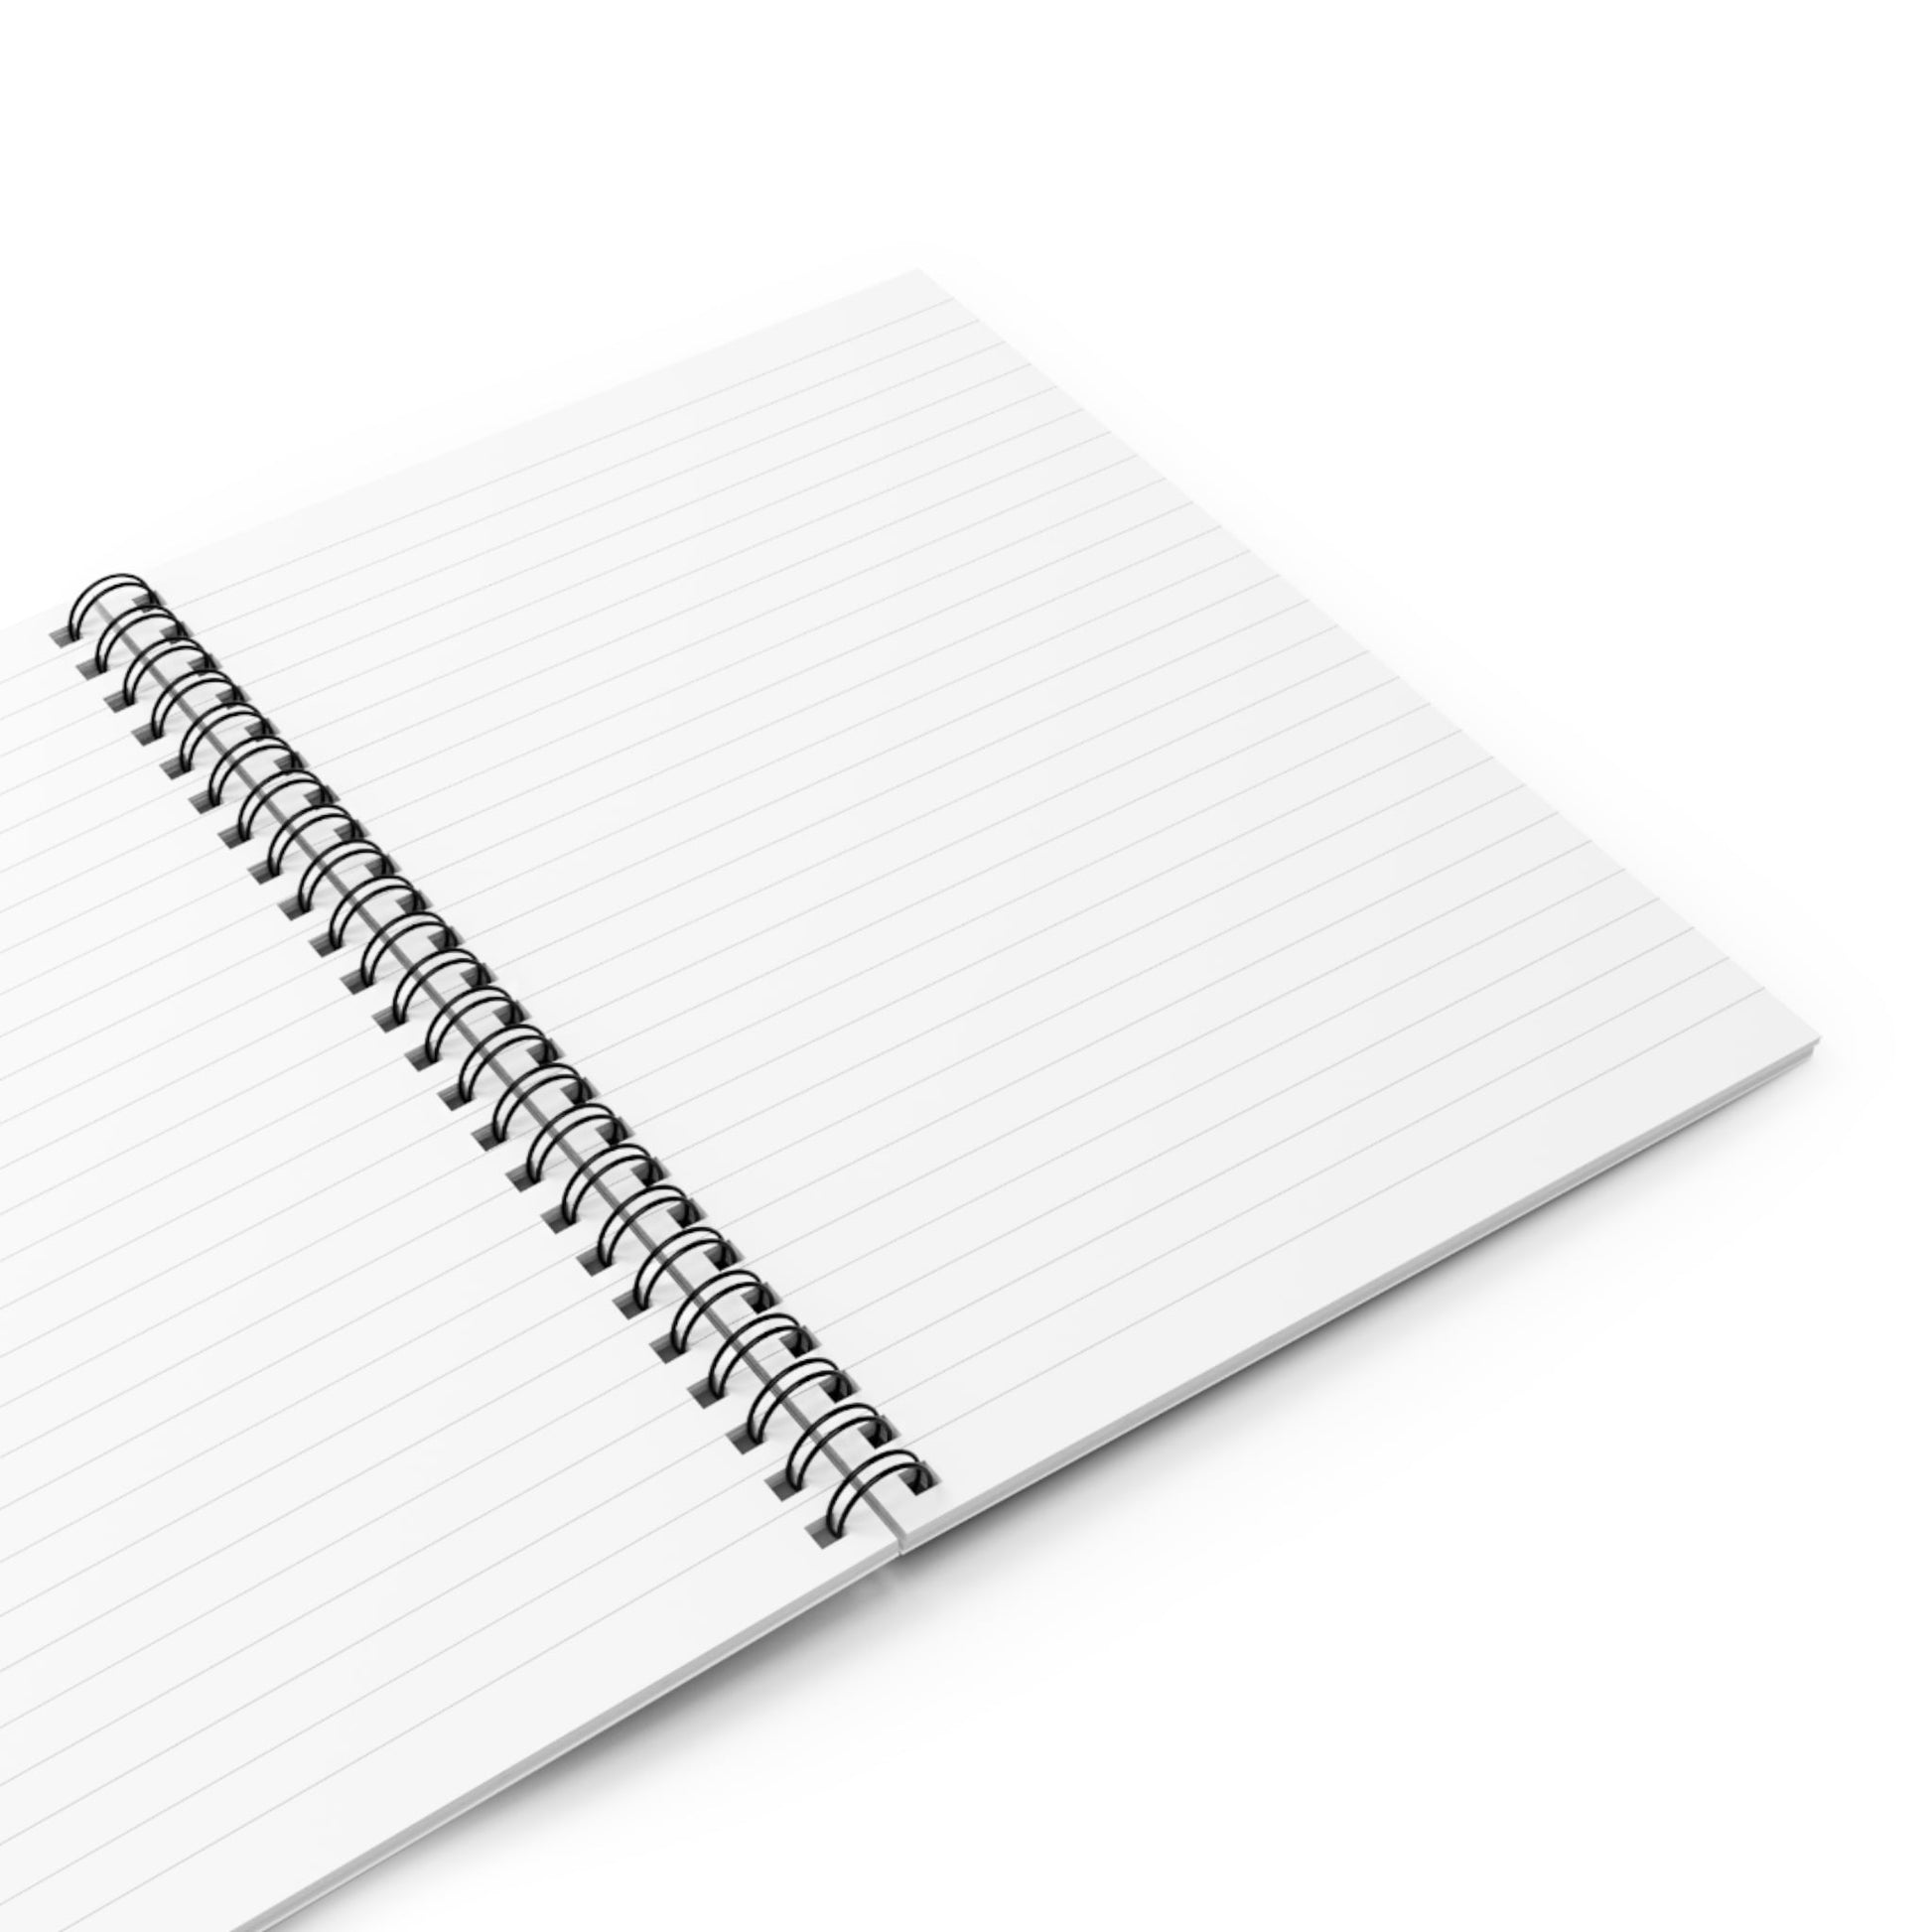 Spiral Notebook with Beautiful Mountain Cover Opened with Blank White College Ruled Pages